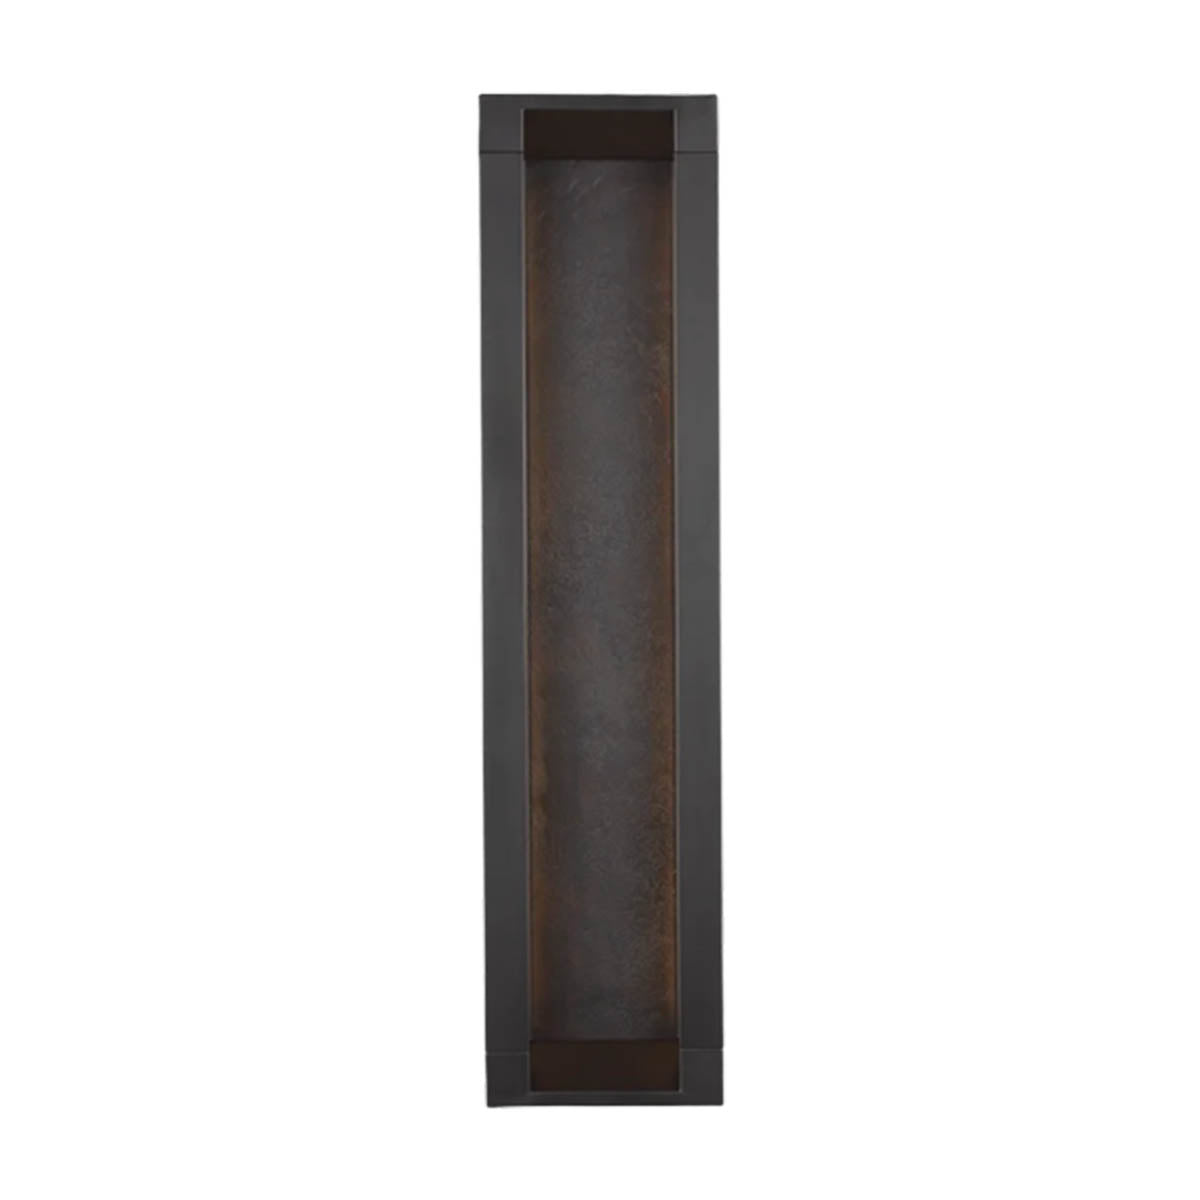 Mattix 26 In. LED Wall Sconce Oil Rubbed Bronze Finish - Bees Lighting